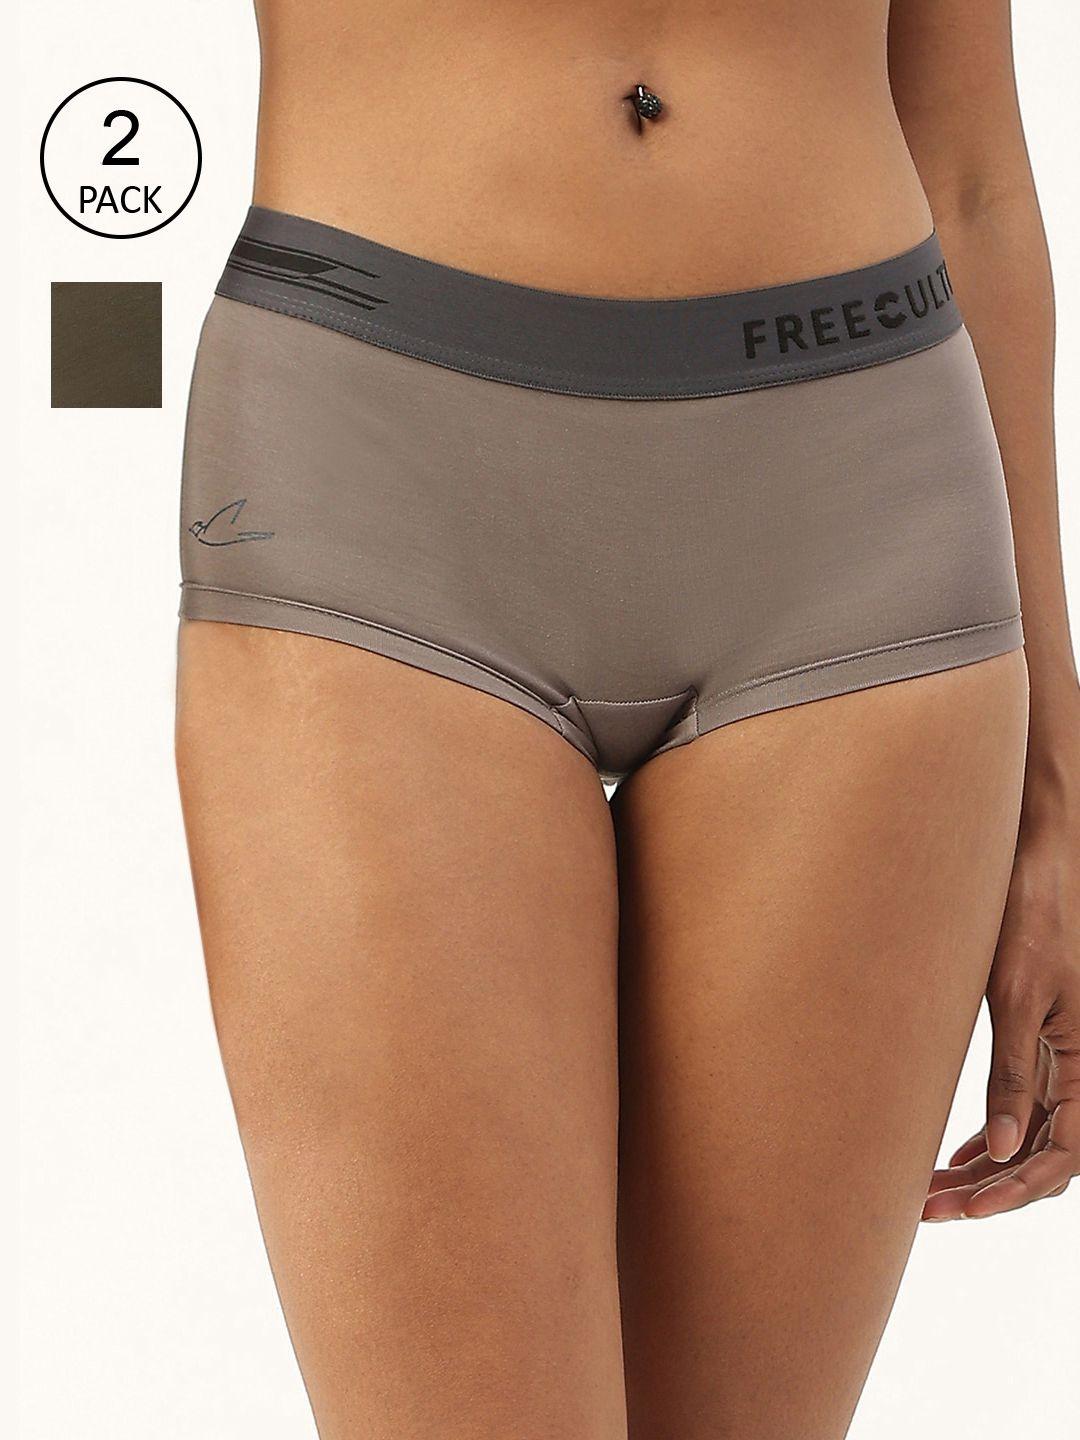 freecultr women pack of 2 grey anti bacterial micro modal boxer briefs